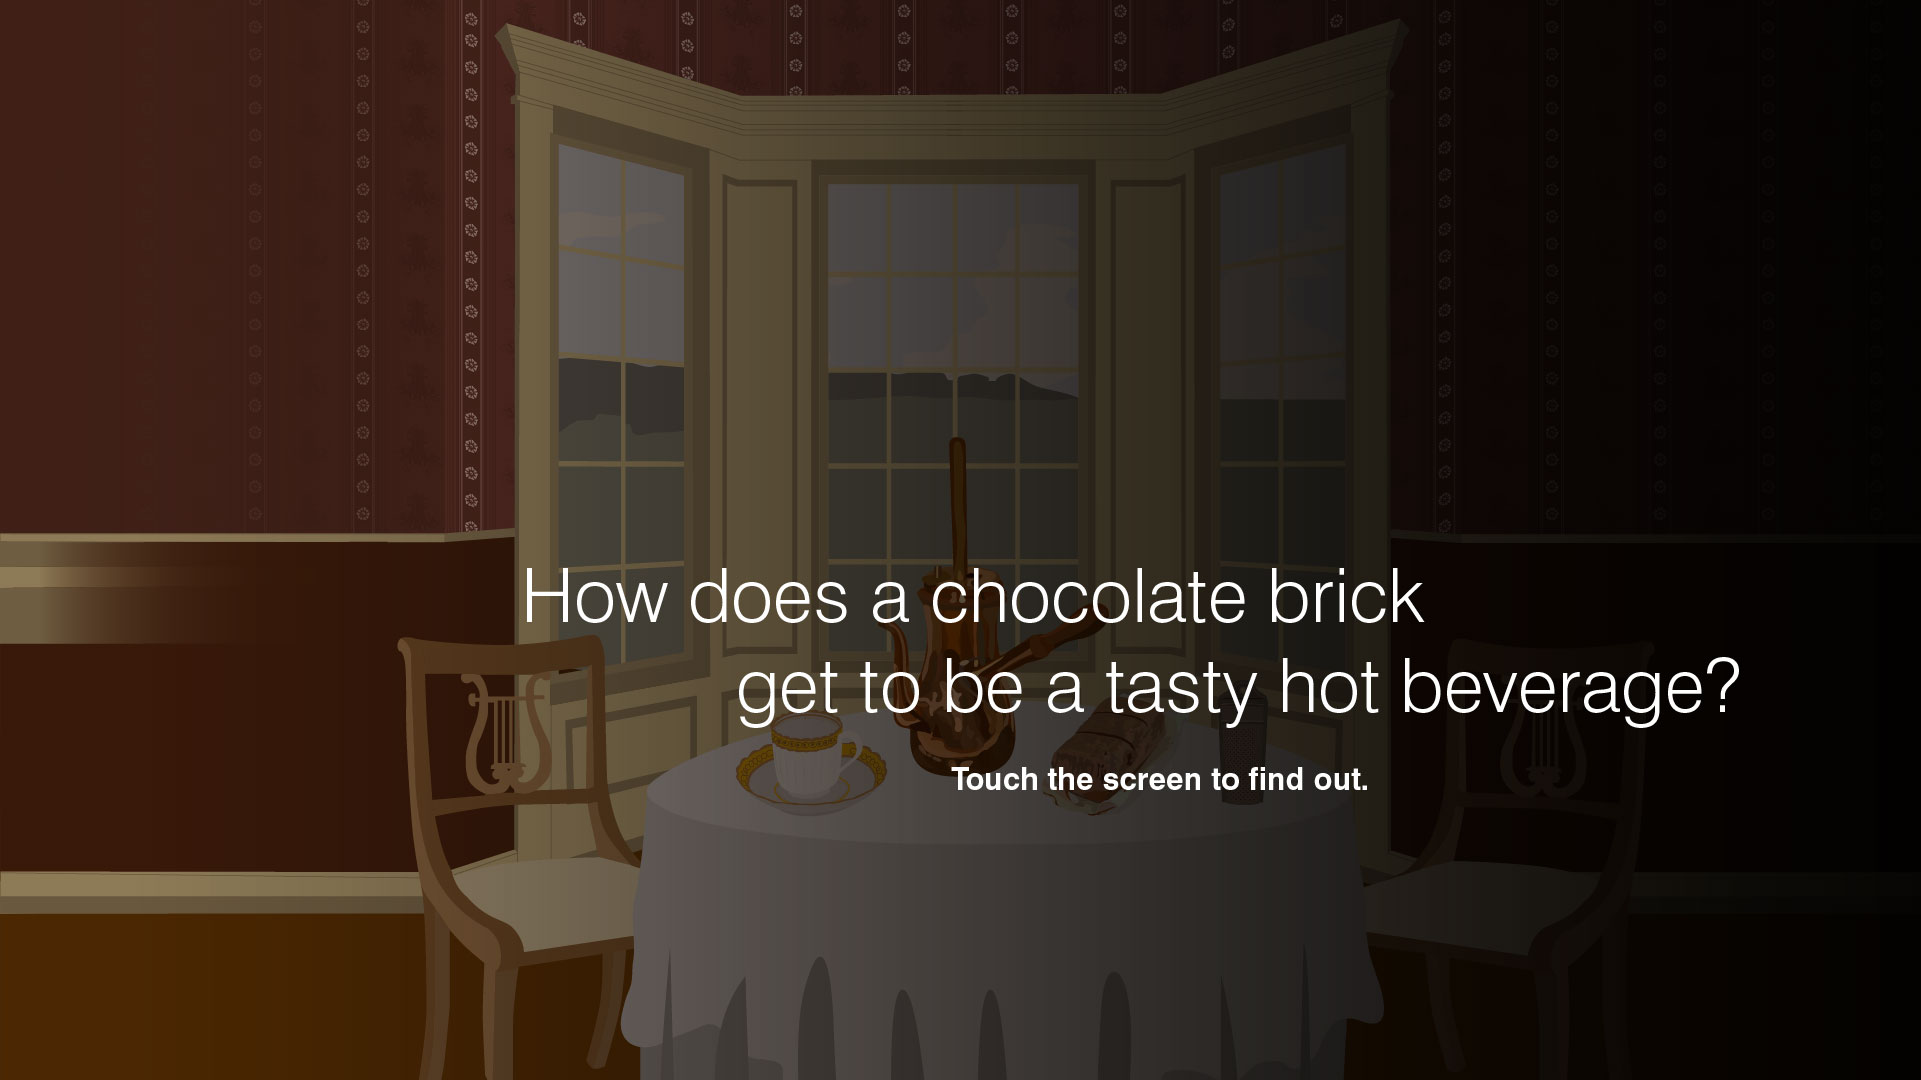 How does a chocolate brick get to be a hot tasty beverage? Touch the screen to find out.